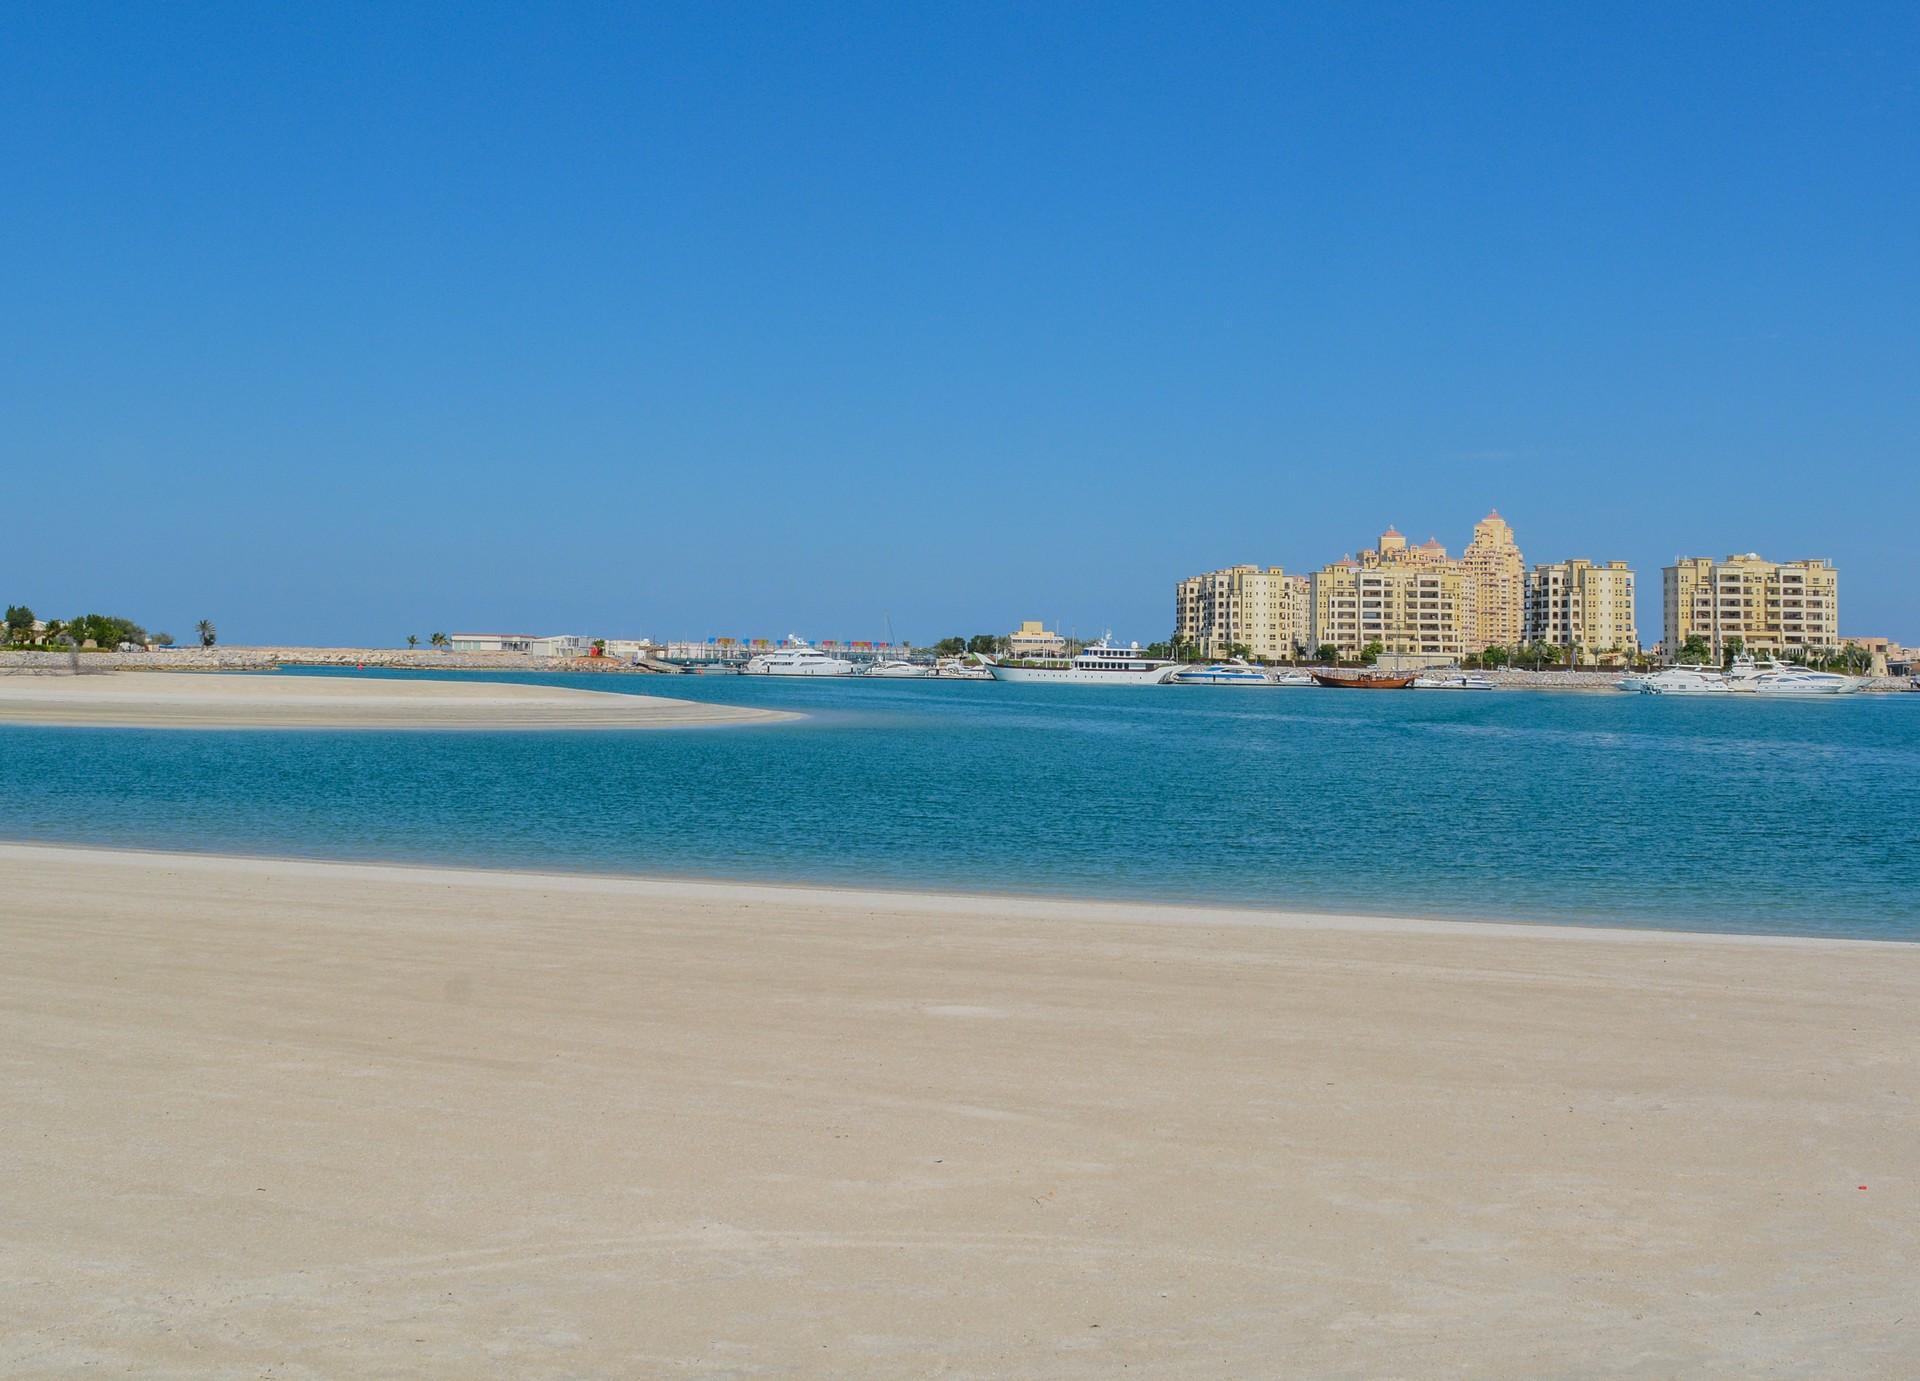 Beach and architecture in Ras al Khaymah with nice weather and blue sky